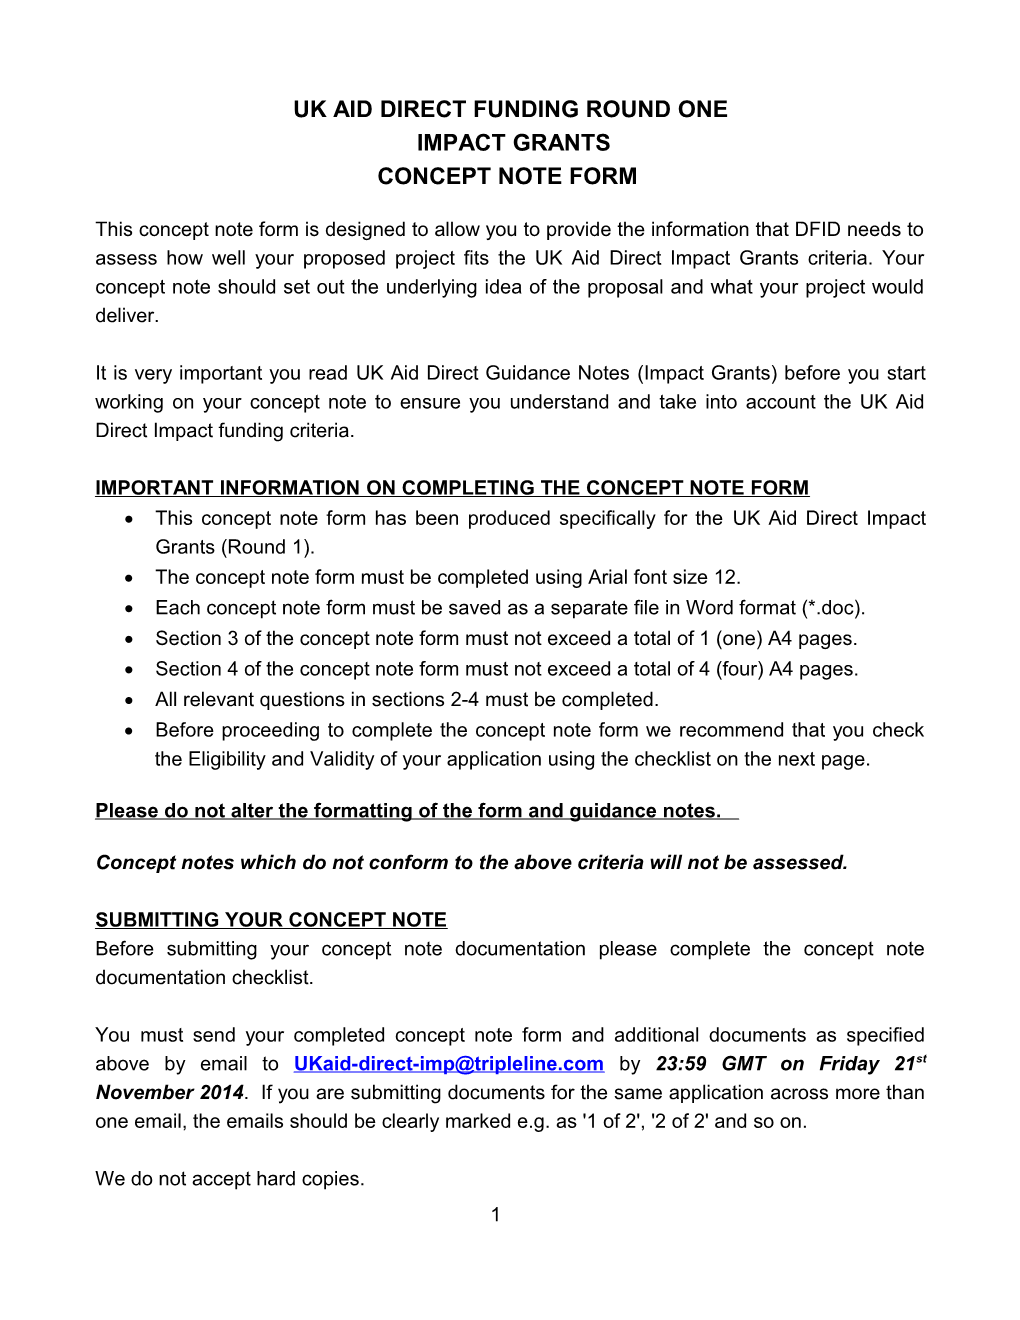 UK Aid Direct Funding Round One Impact Grants Concept Note Form